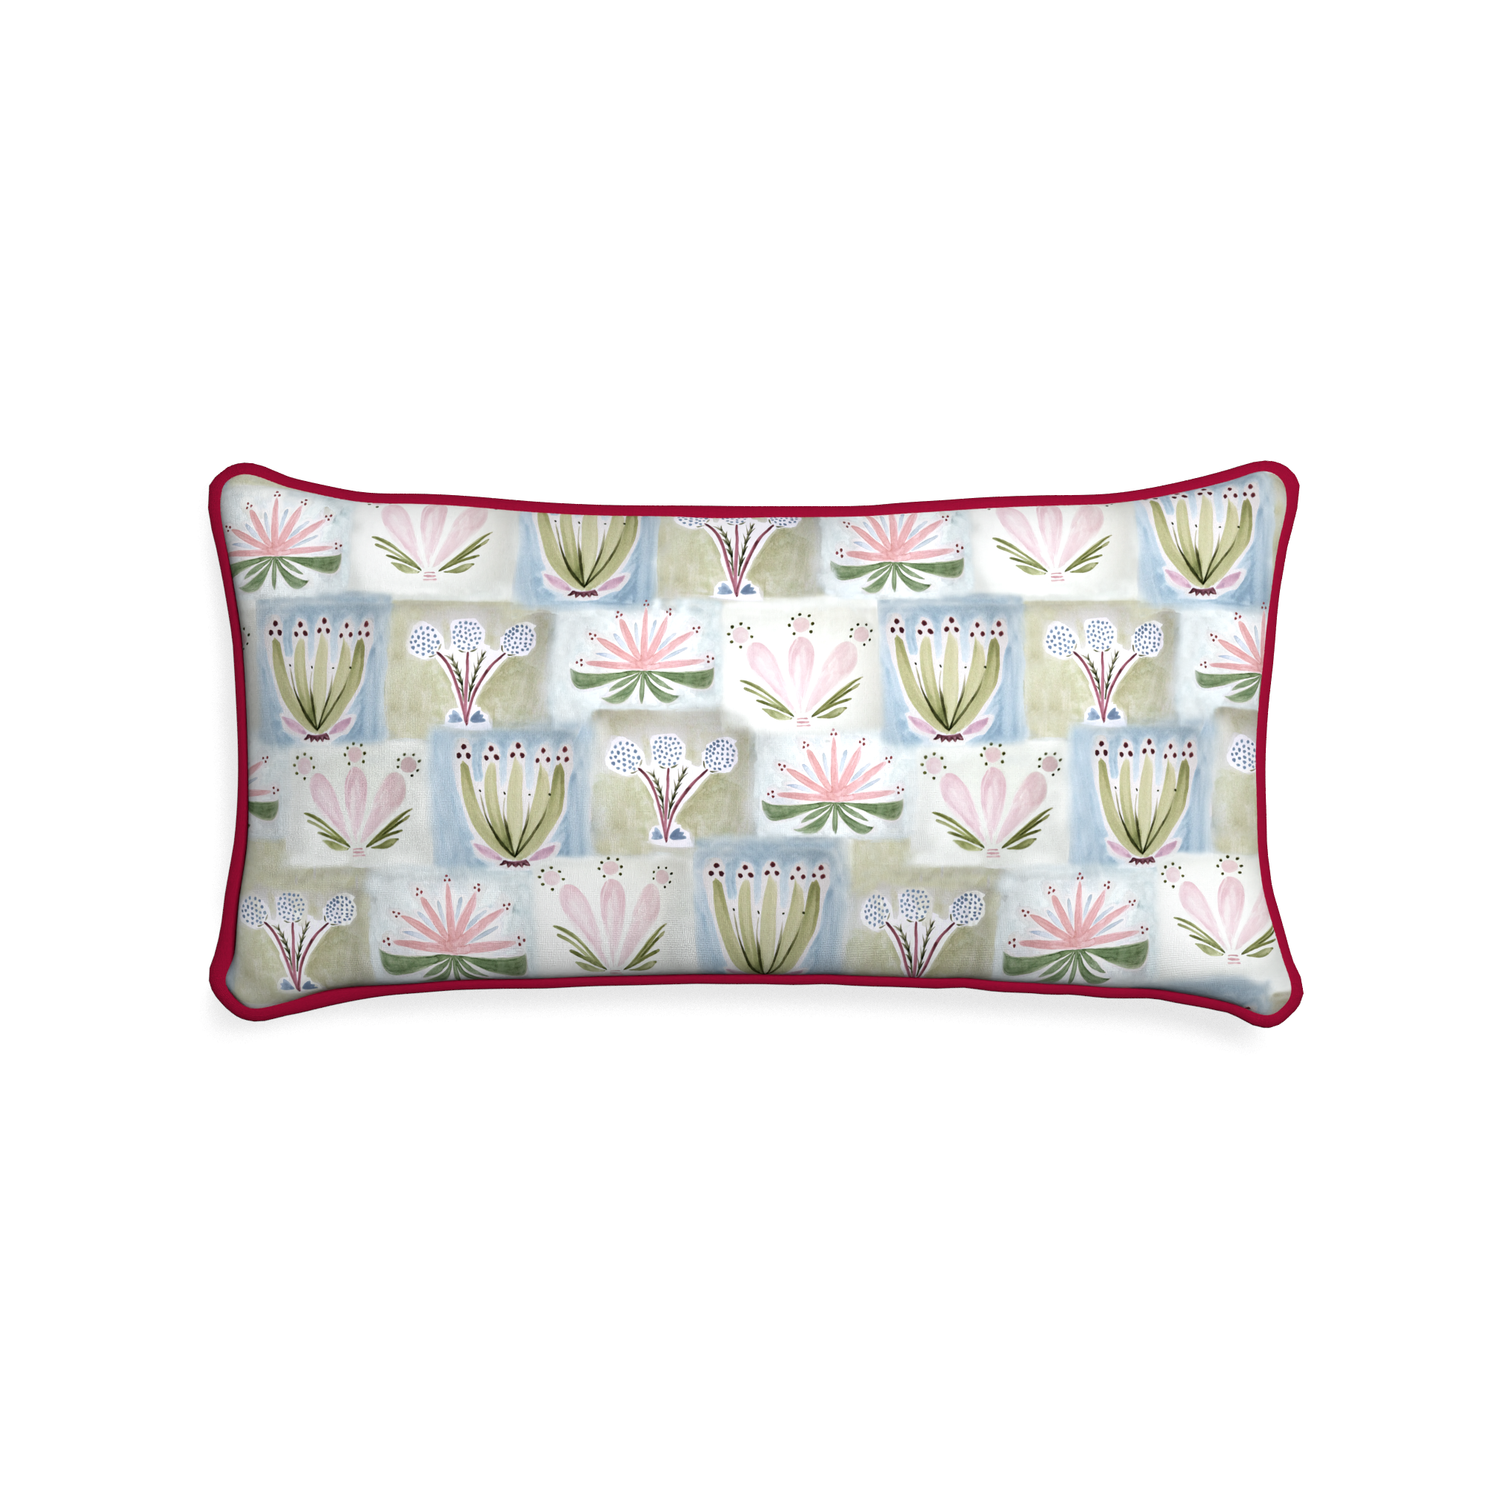 Midi-lumbar harper custom hand-painted floralpillow with raspberry piping on white background